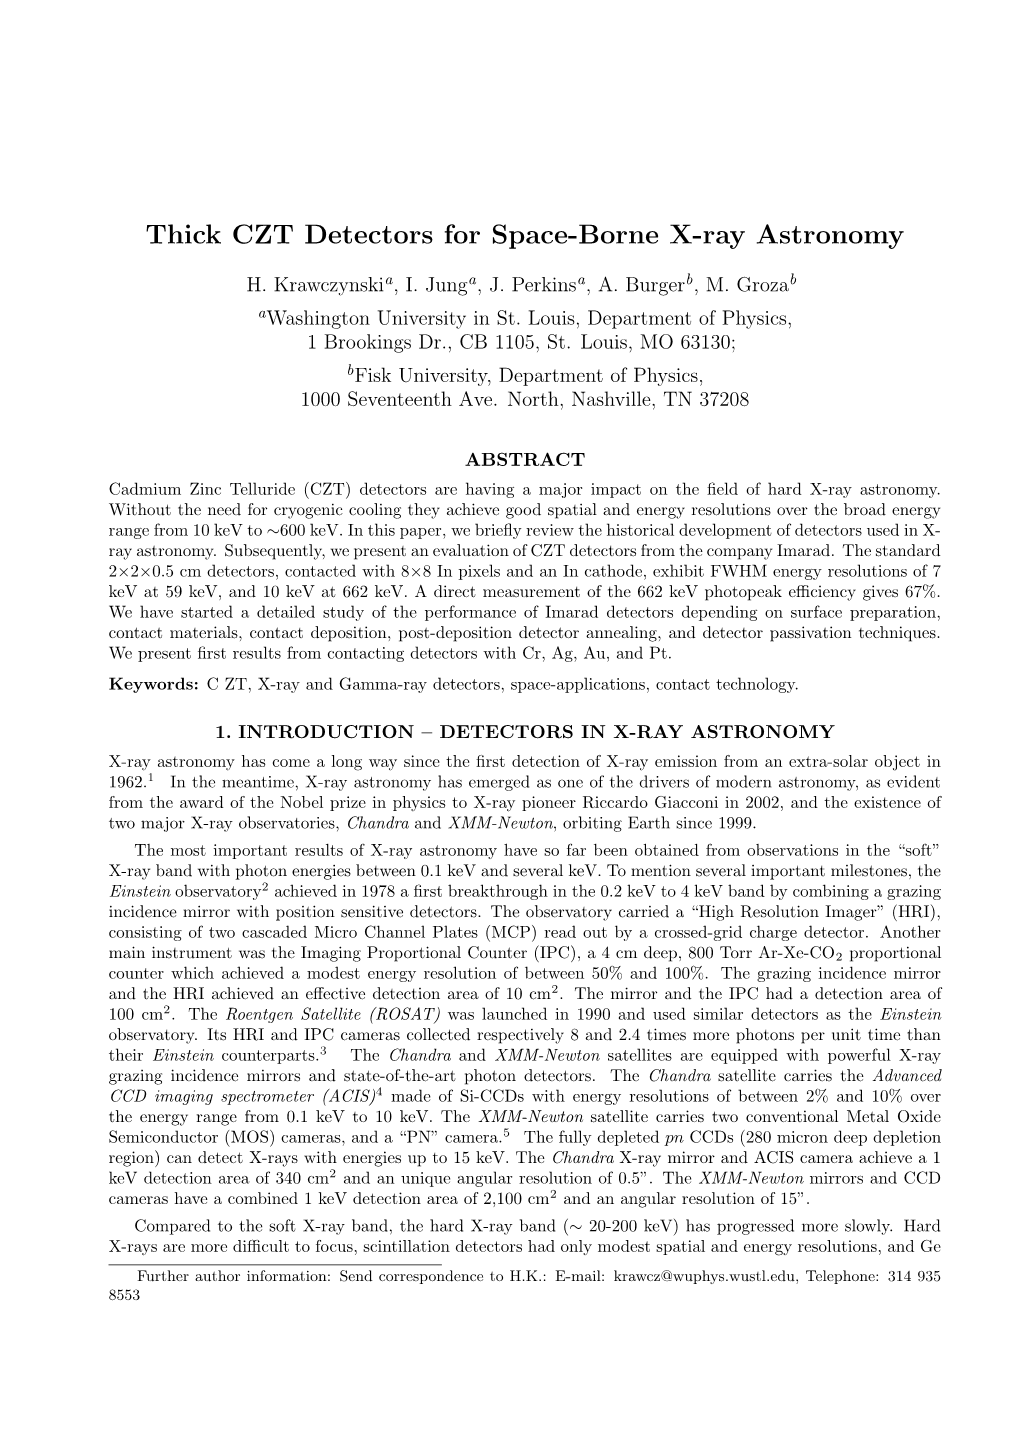 Thick CZT Detectors for Space-Borne X-Ray Astronomy